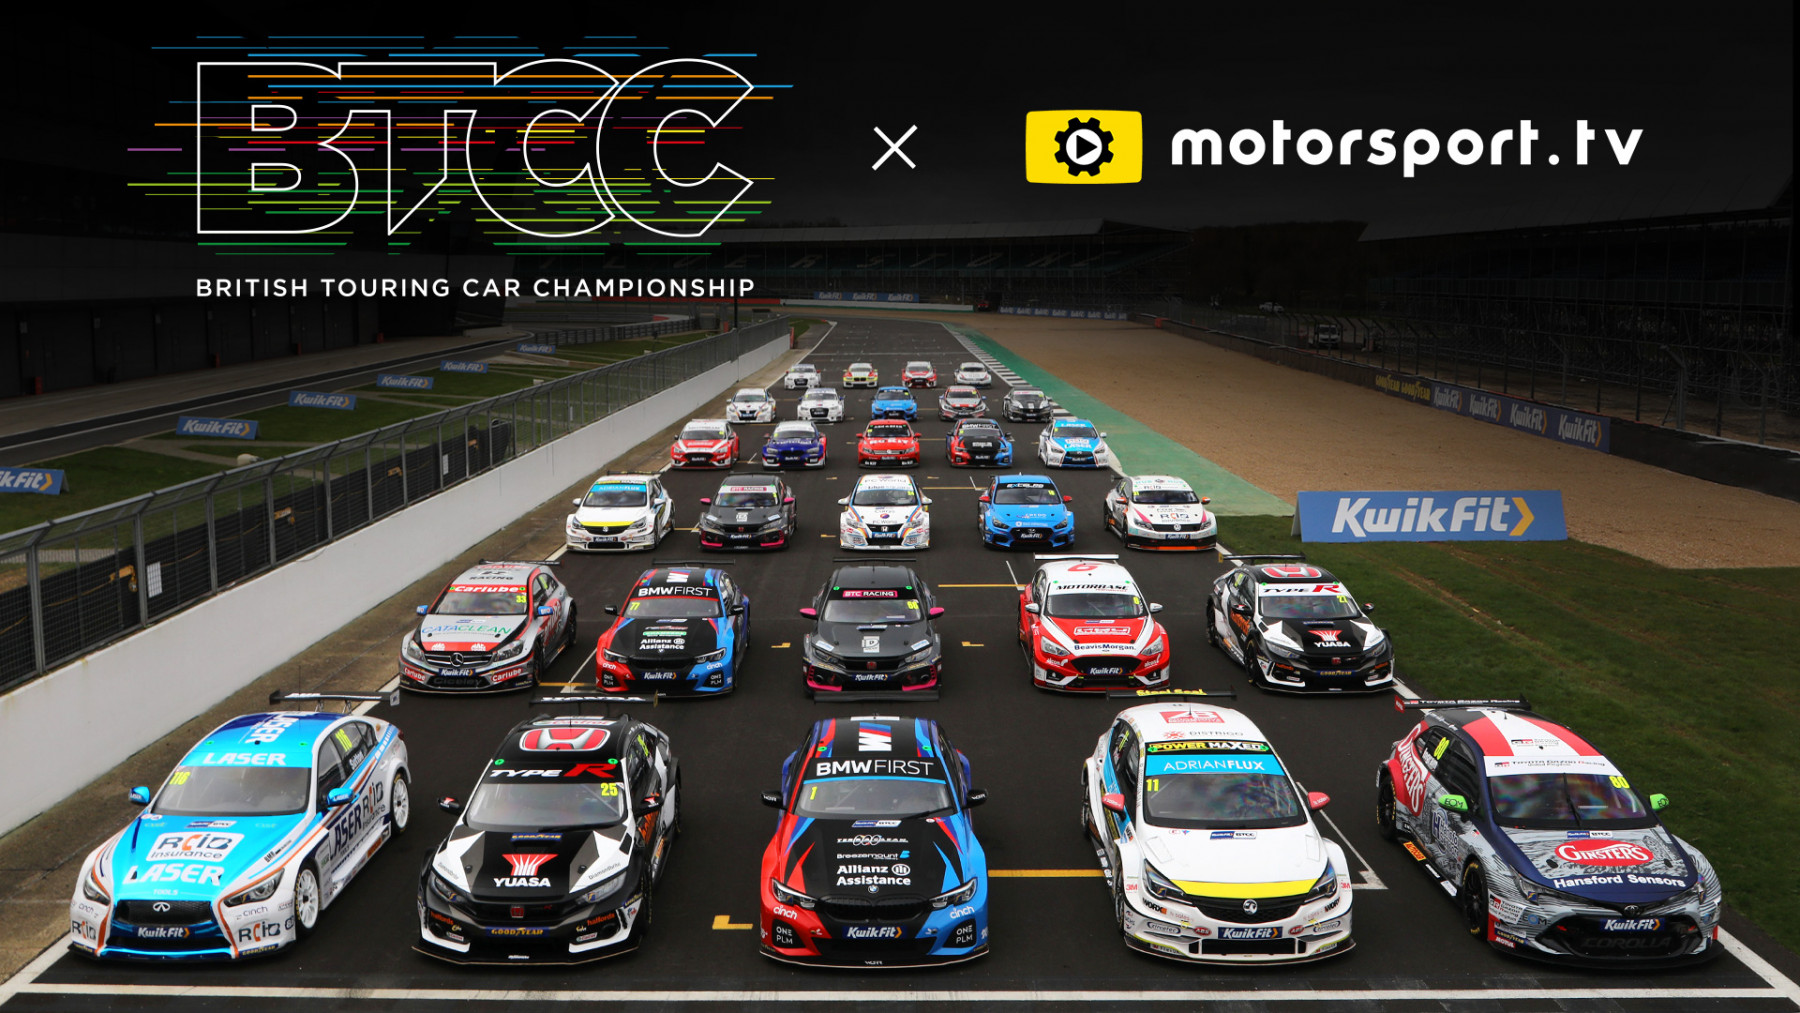 British Touring Car Championship goes live with new Motorsport channel